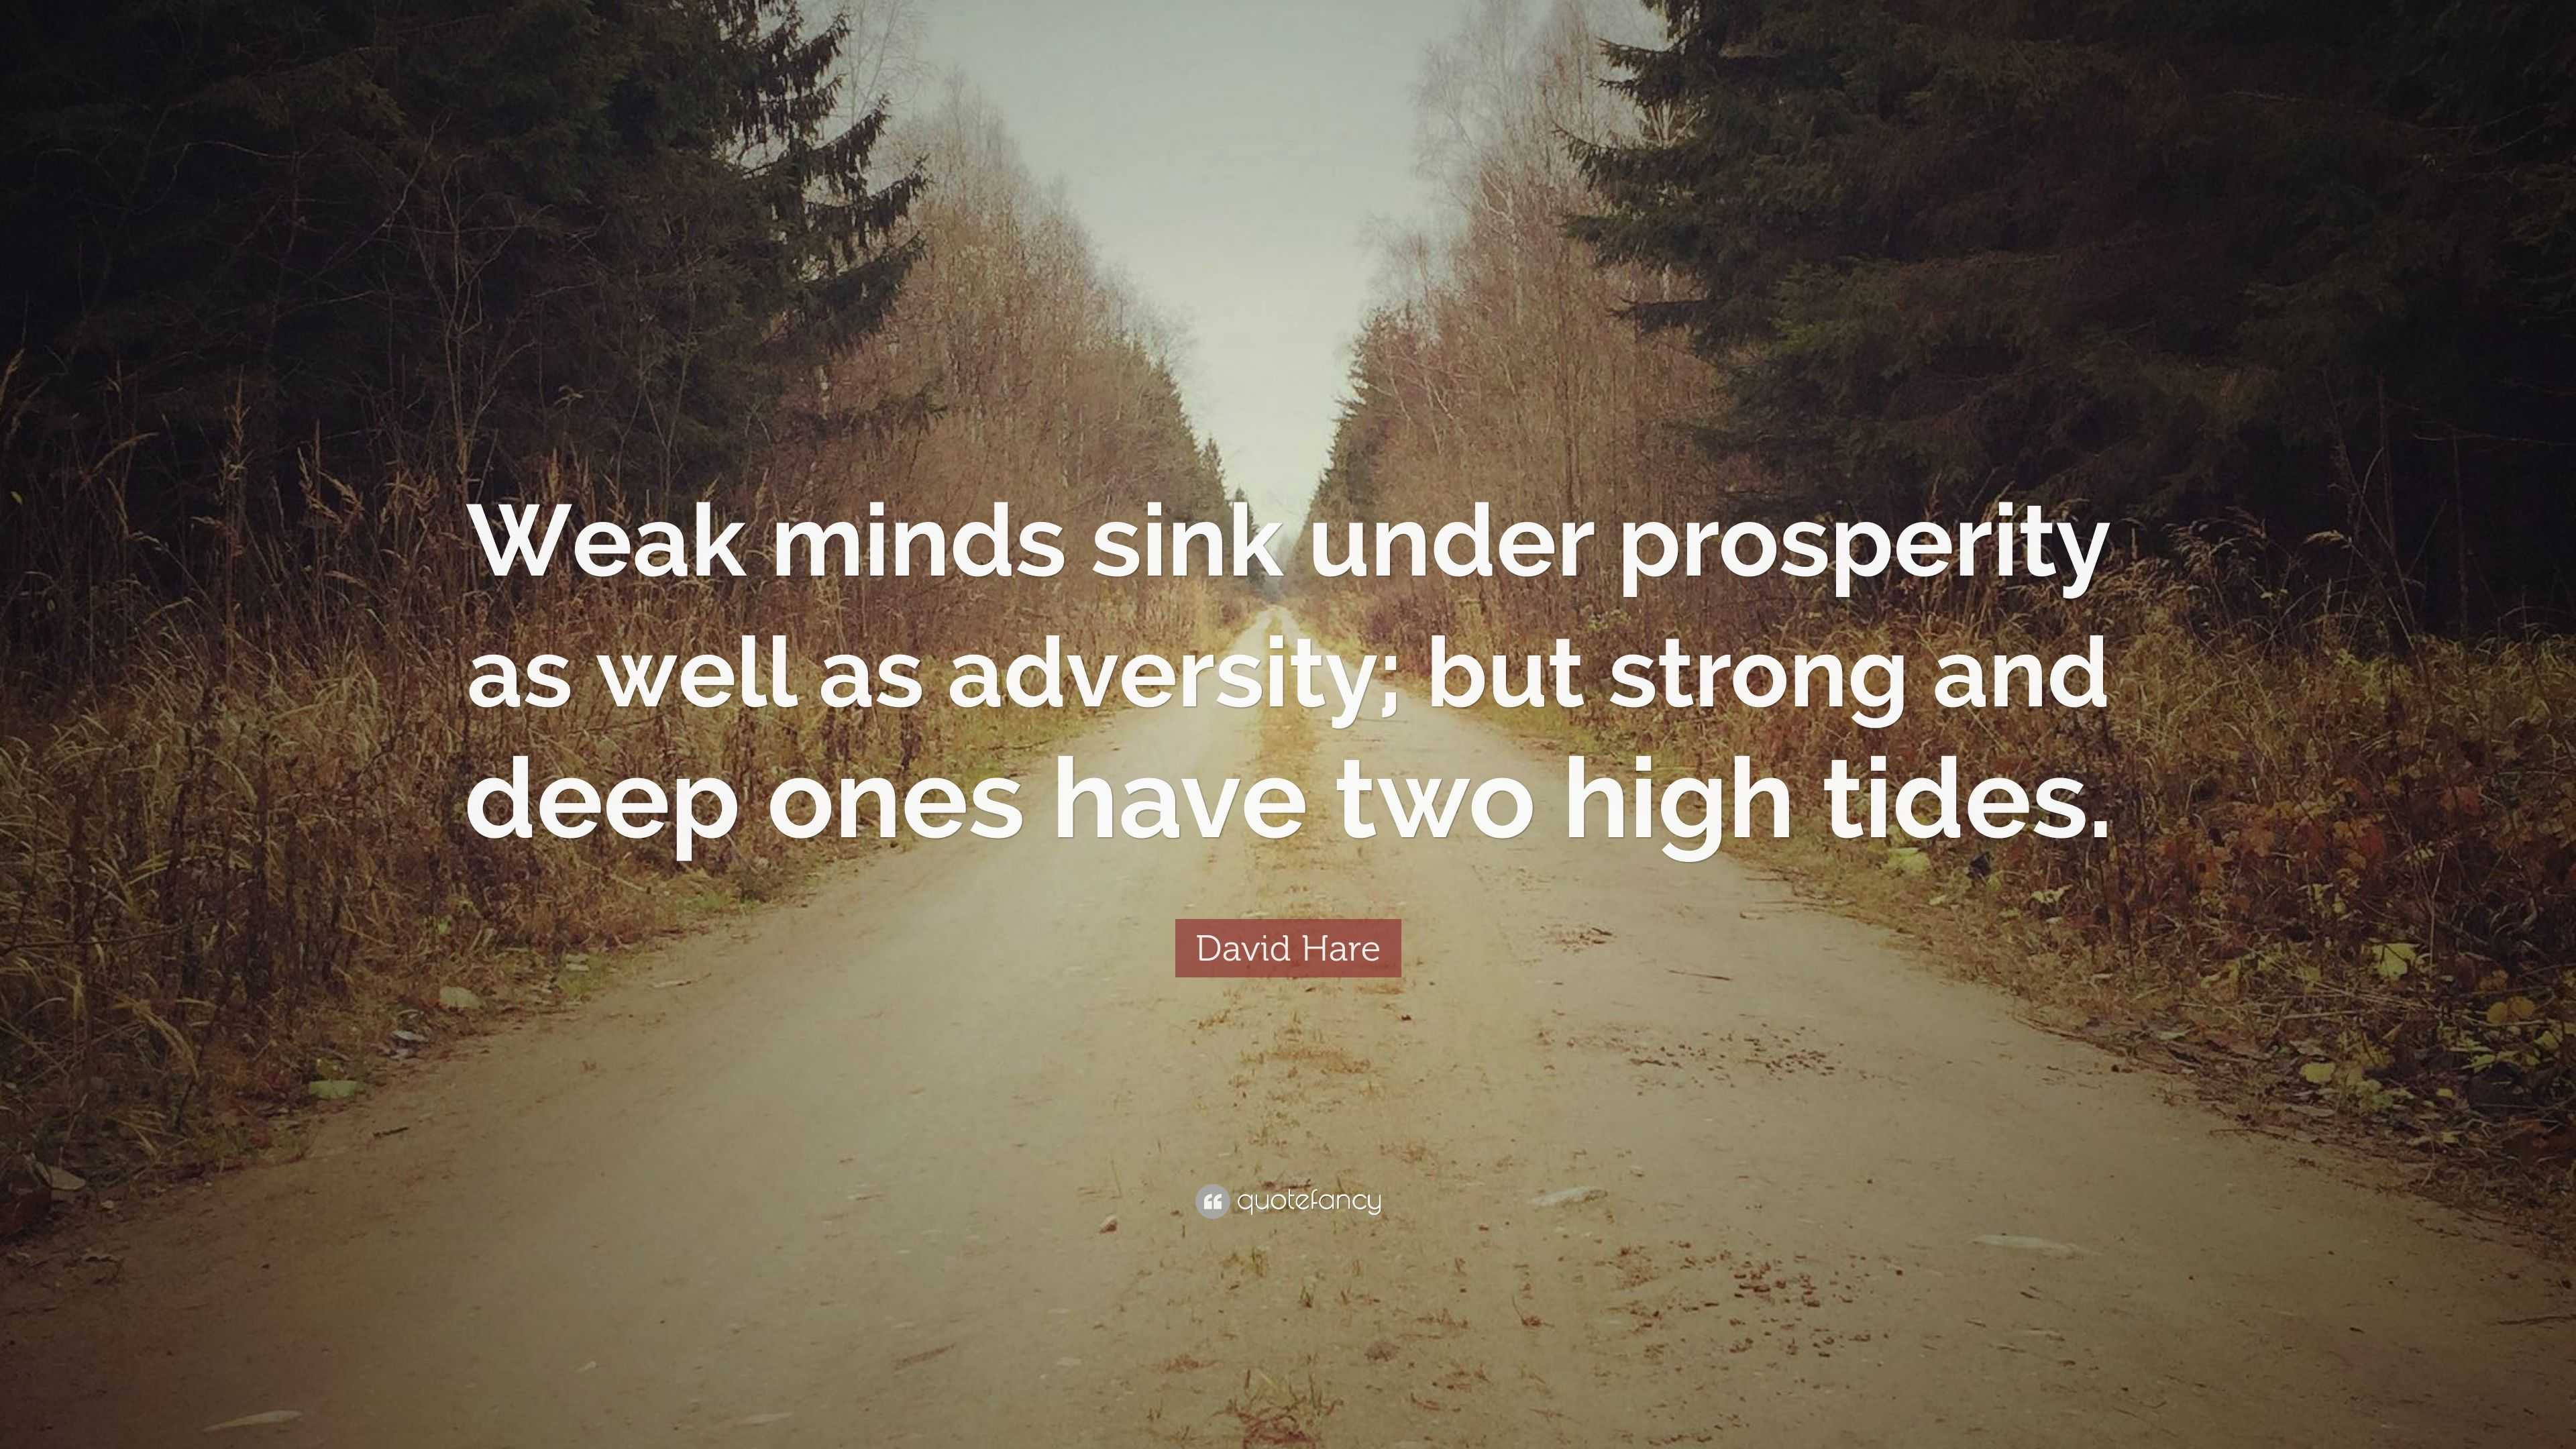 David Hare Quote: “Weak minds sink under prosperity as well as